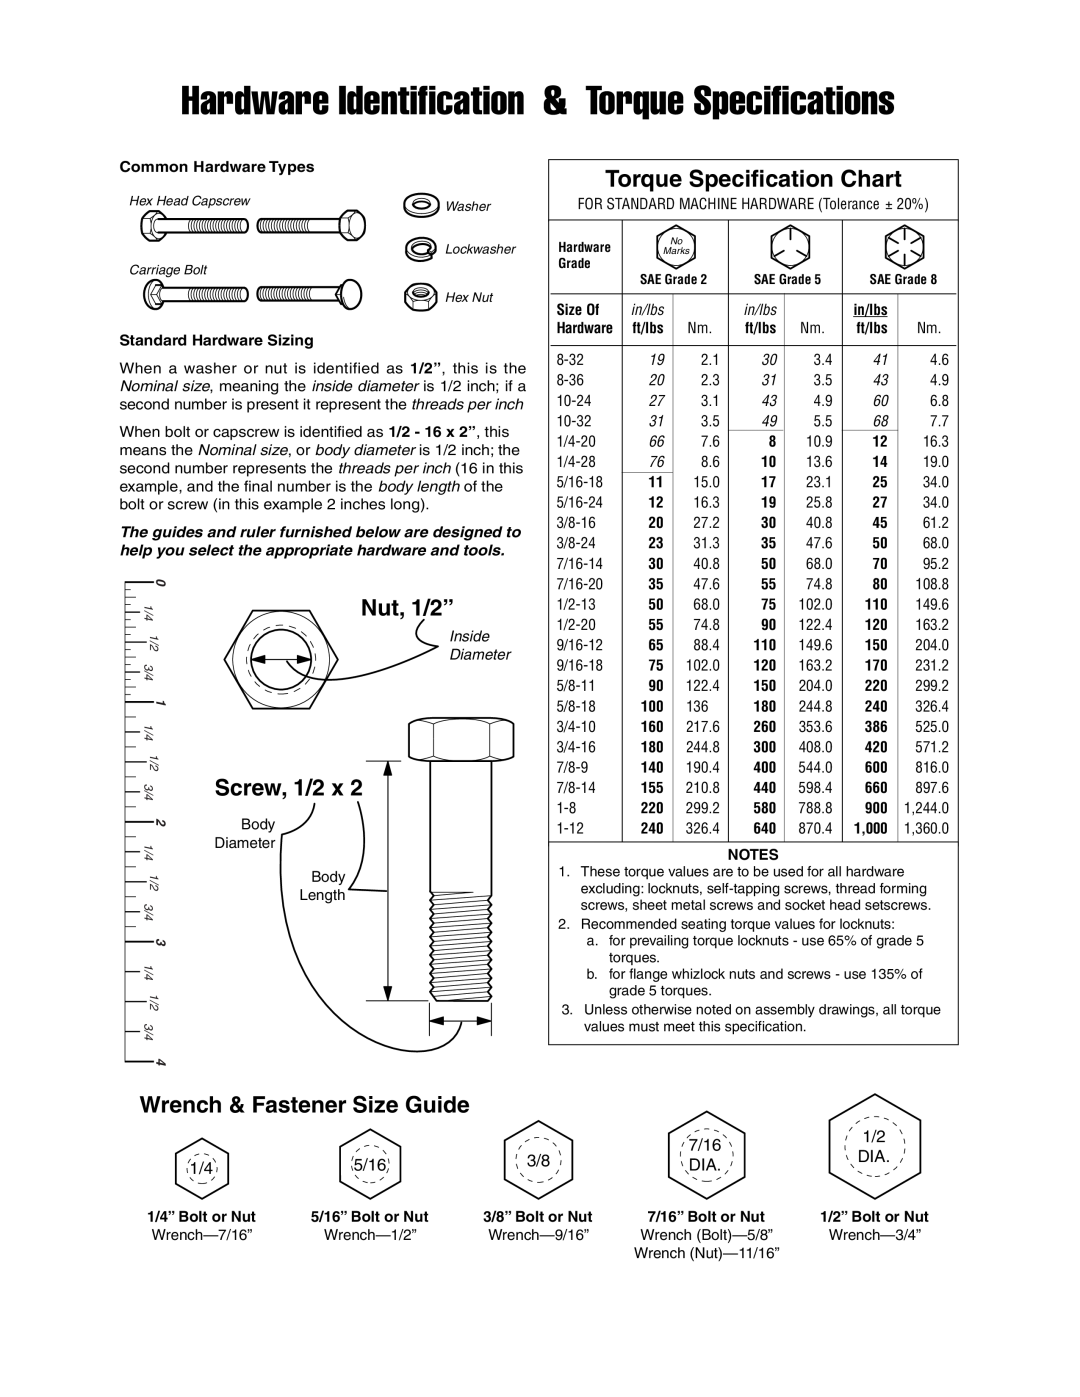 Simplicity 1695307 Wrench & Fastener Size Guide, 7/16, 5/16, Hardware Identification & Torque Specifications, Nut, 1/2” 